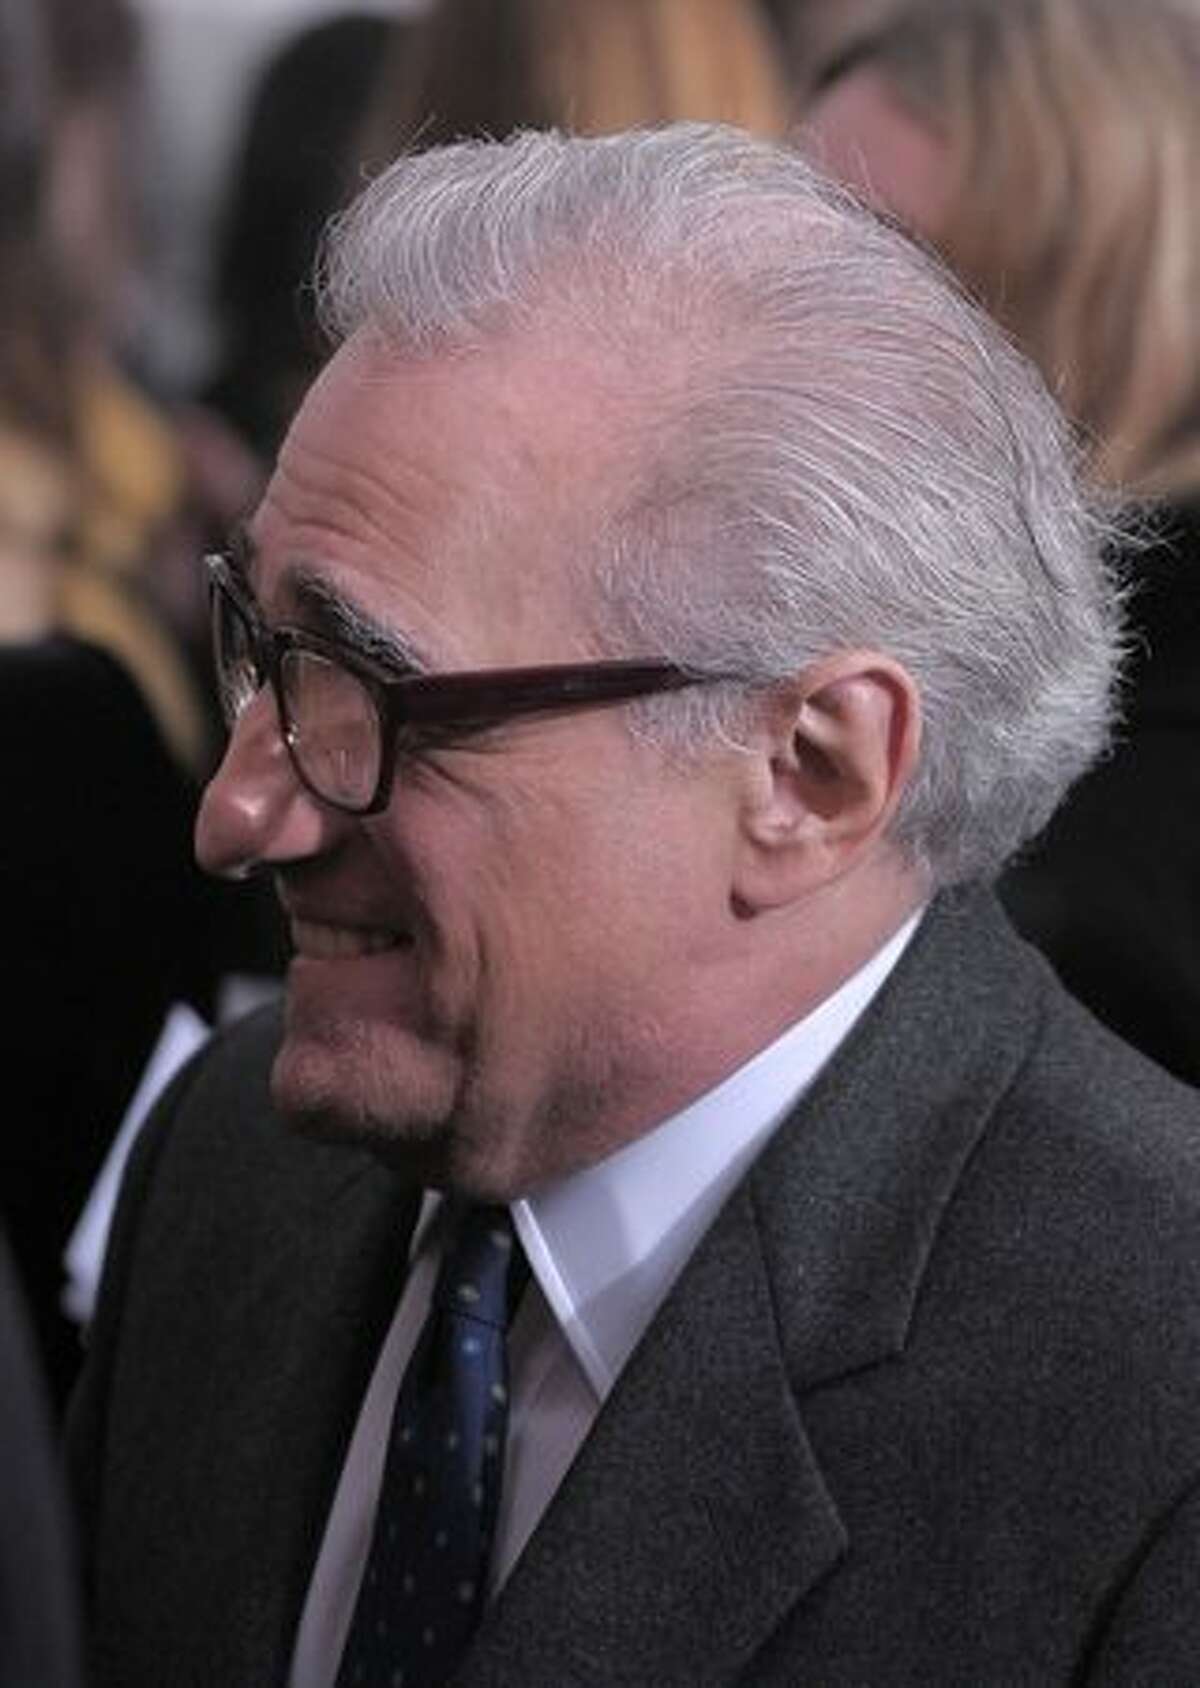 Director and producer Martin Scorsese attends the "Shutter Island" special screening at the Ziegfeld Theatre on February 17, 2010 in New York City.